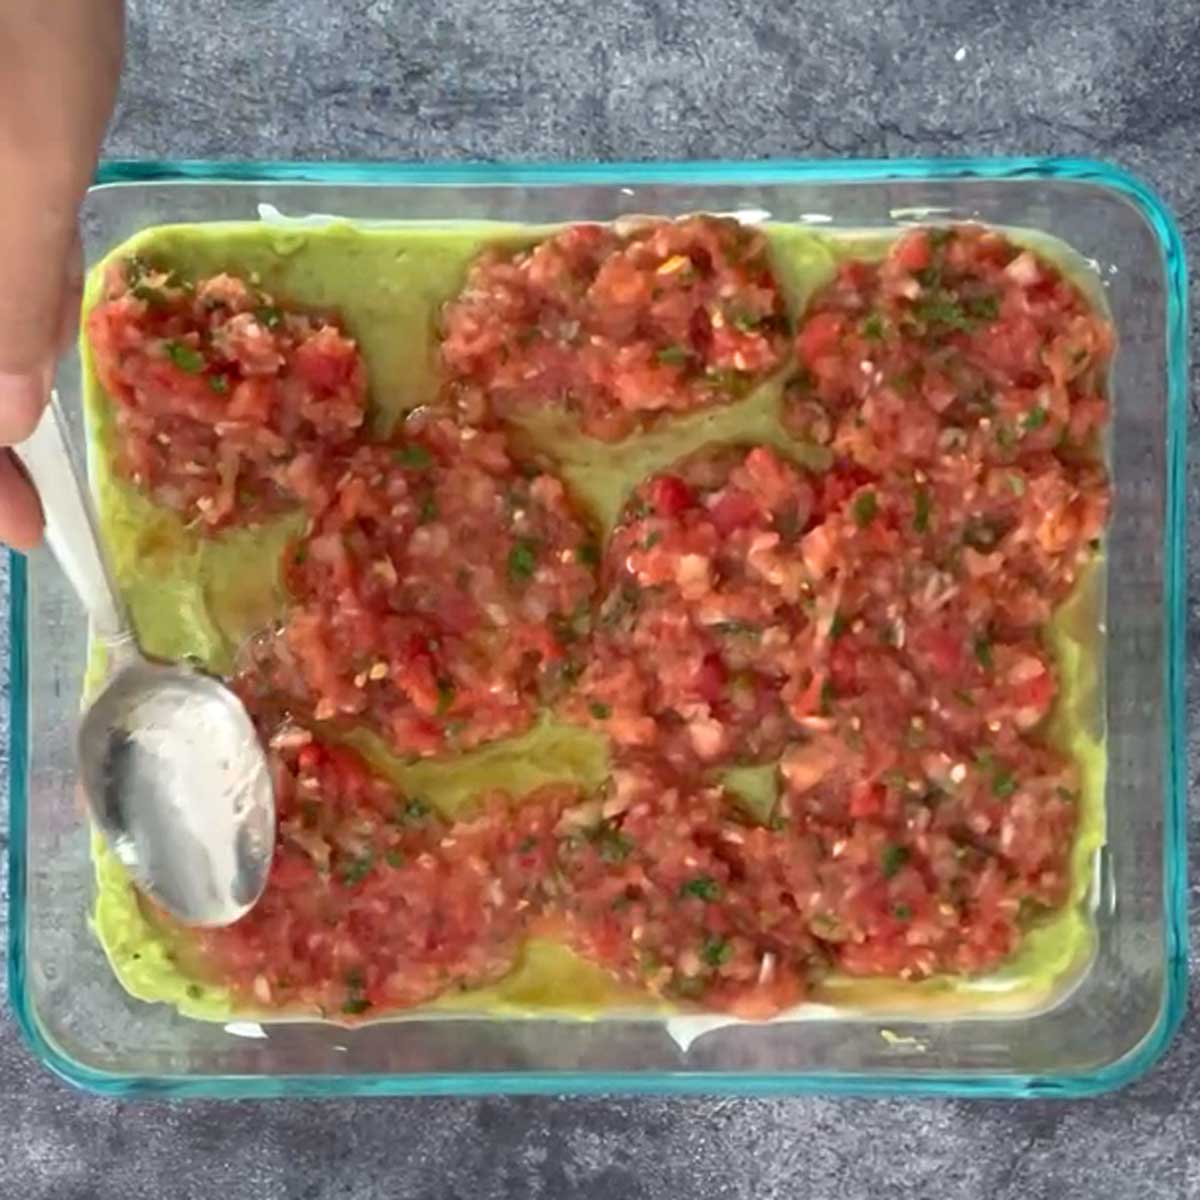 Spreading salsa for 7-layer dip.